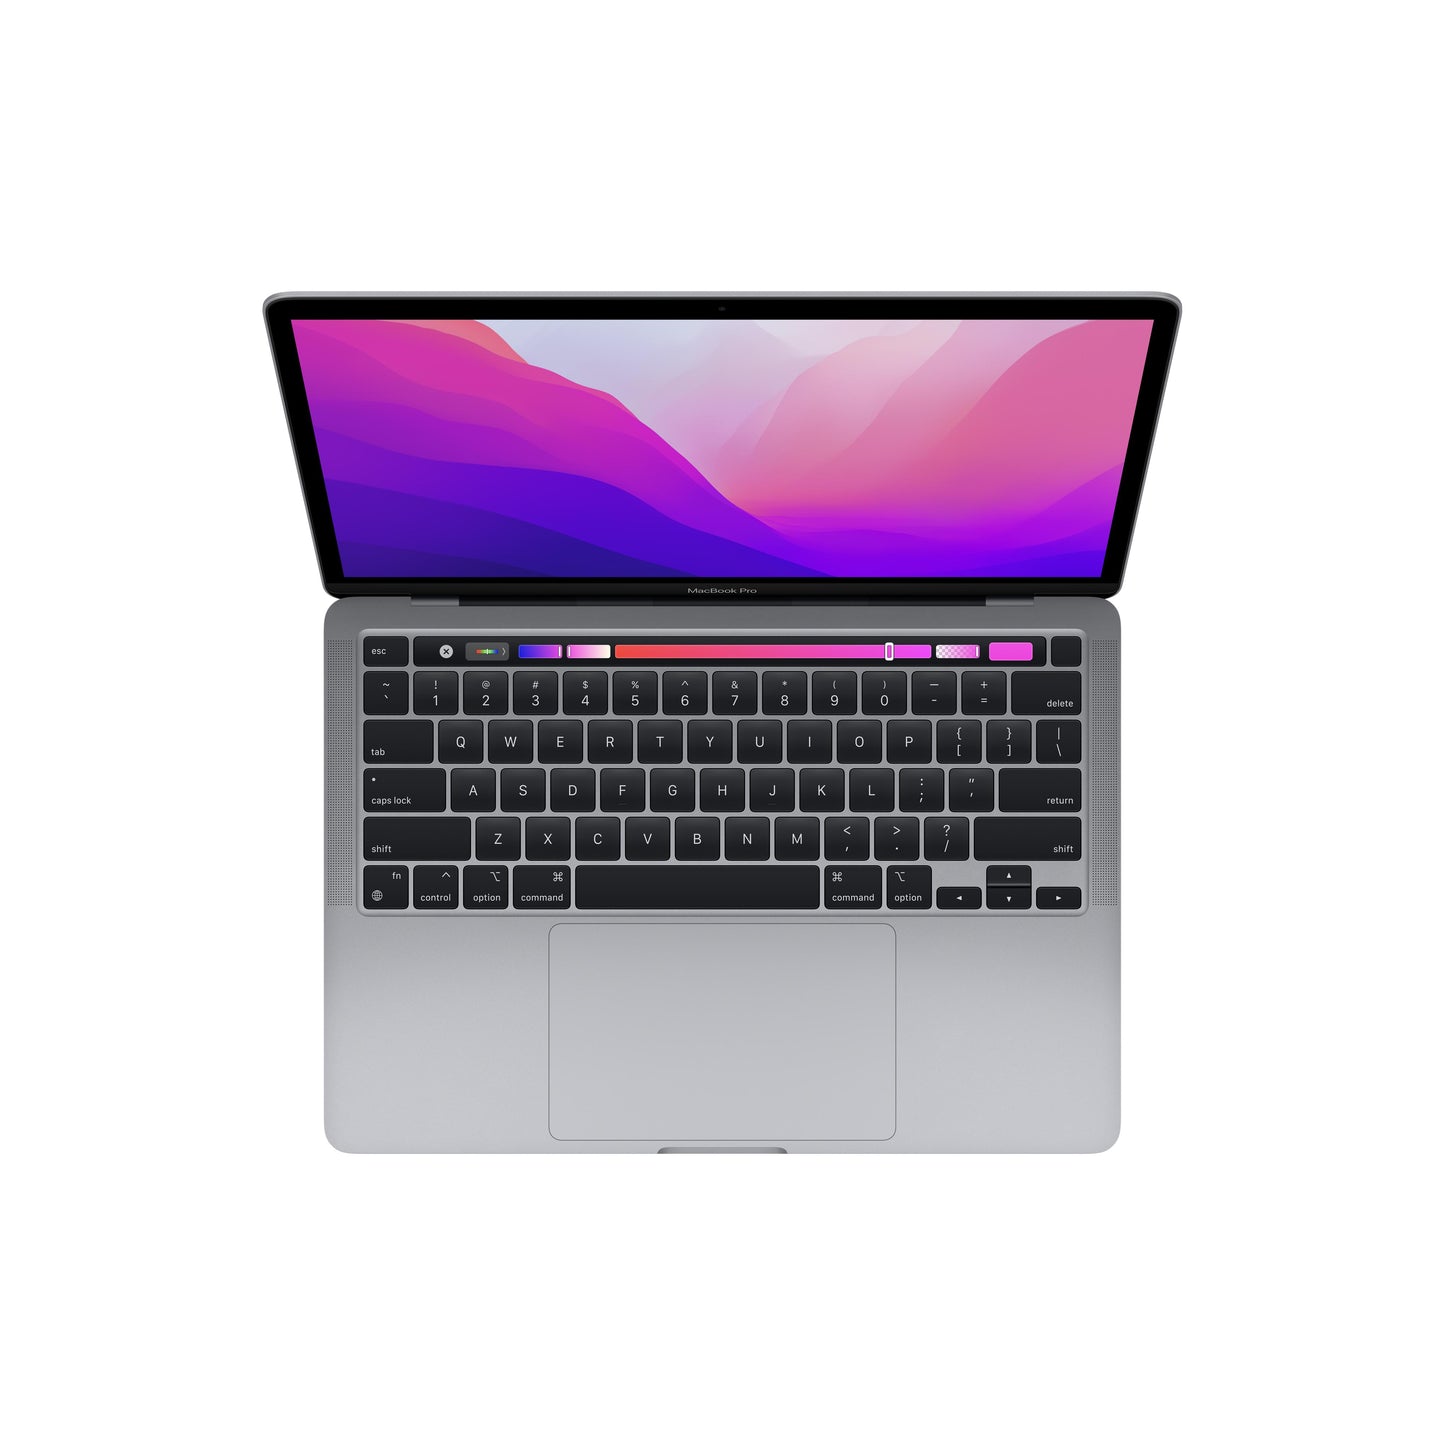 13-inch MacBook Pro: Apple M2 chip with 8_core CPU and 10_core GPU, 256GB SSD - Space Grey